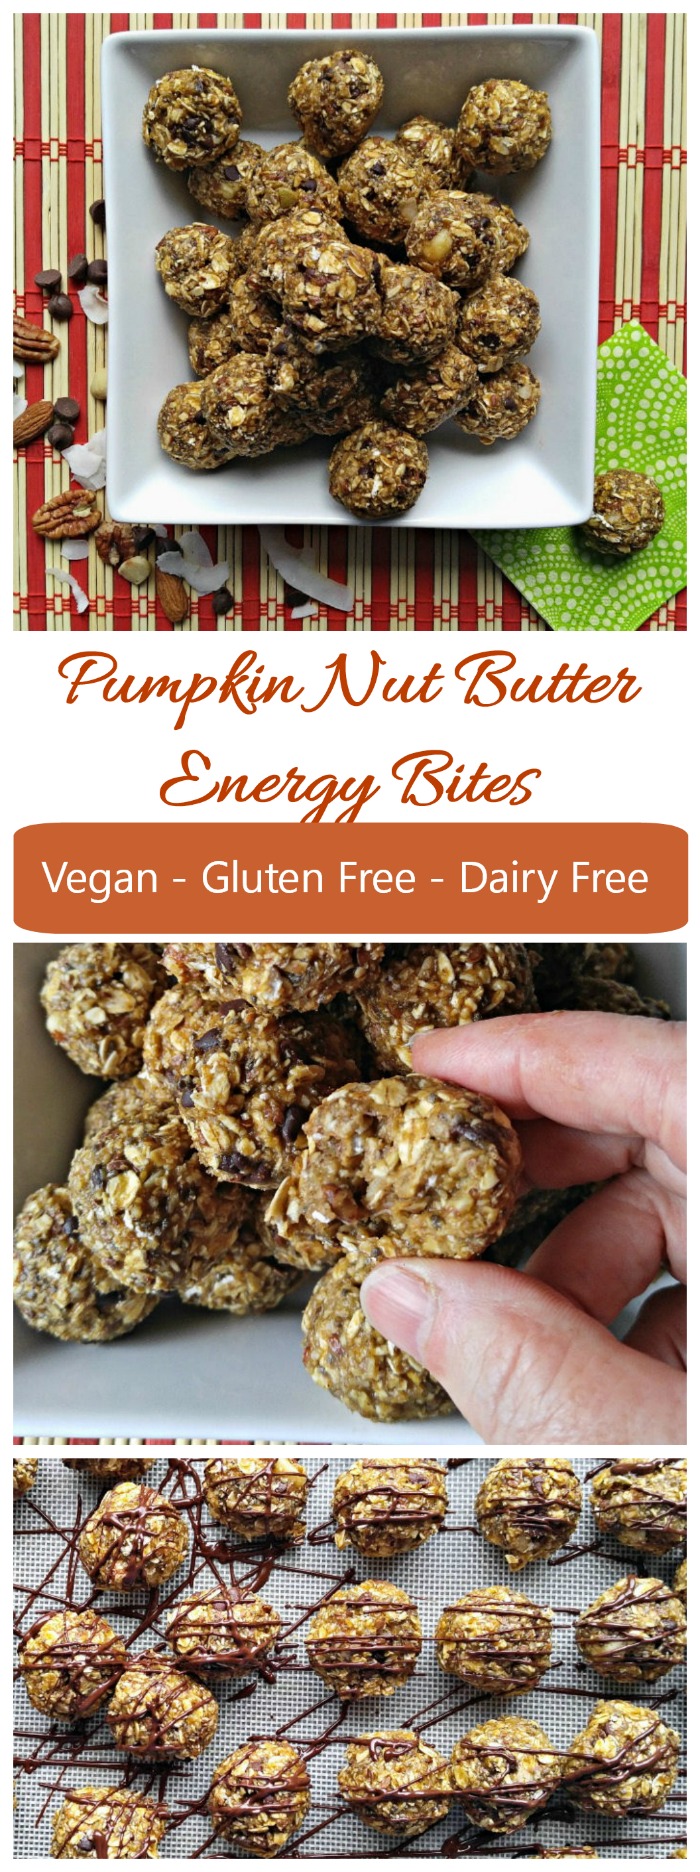 These pumpkin nut butter energy bites are gluten free, dairy free and low in sugar for a super vegan treat.